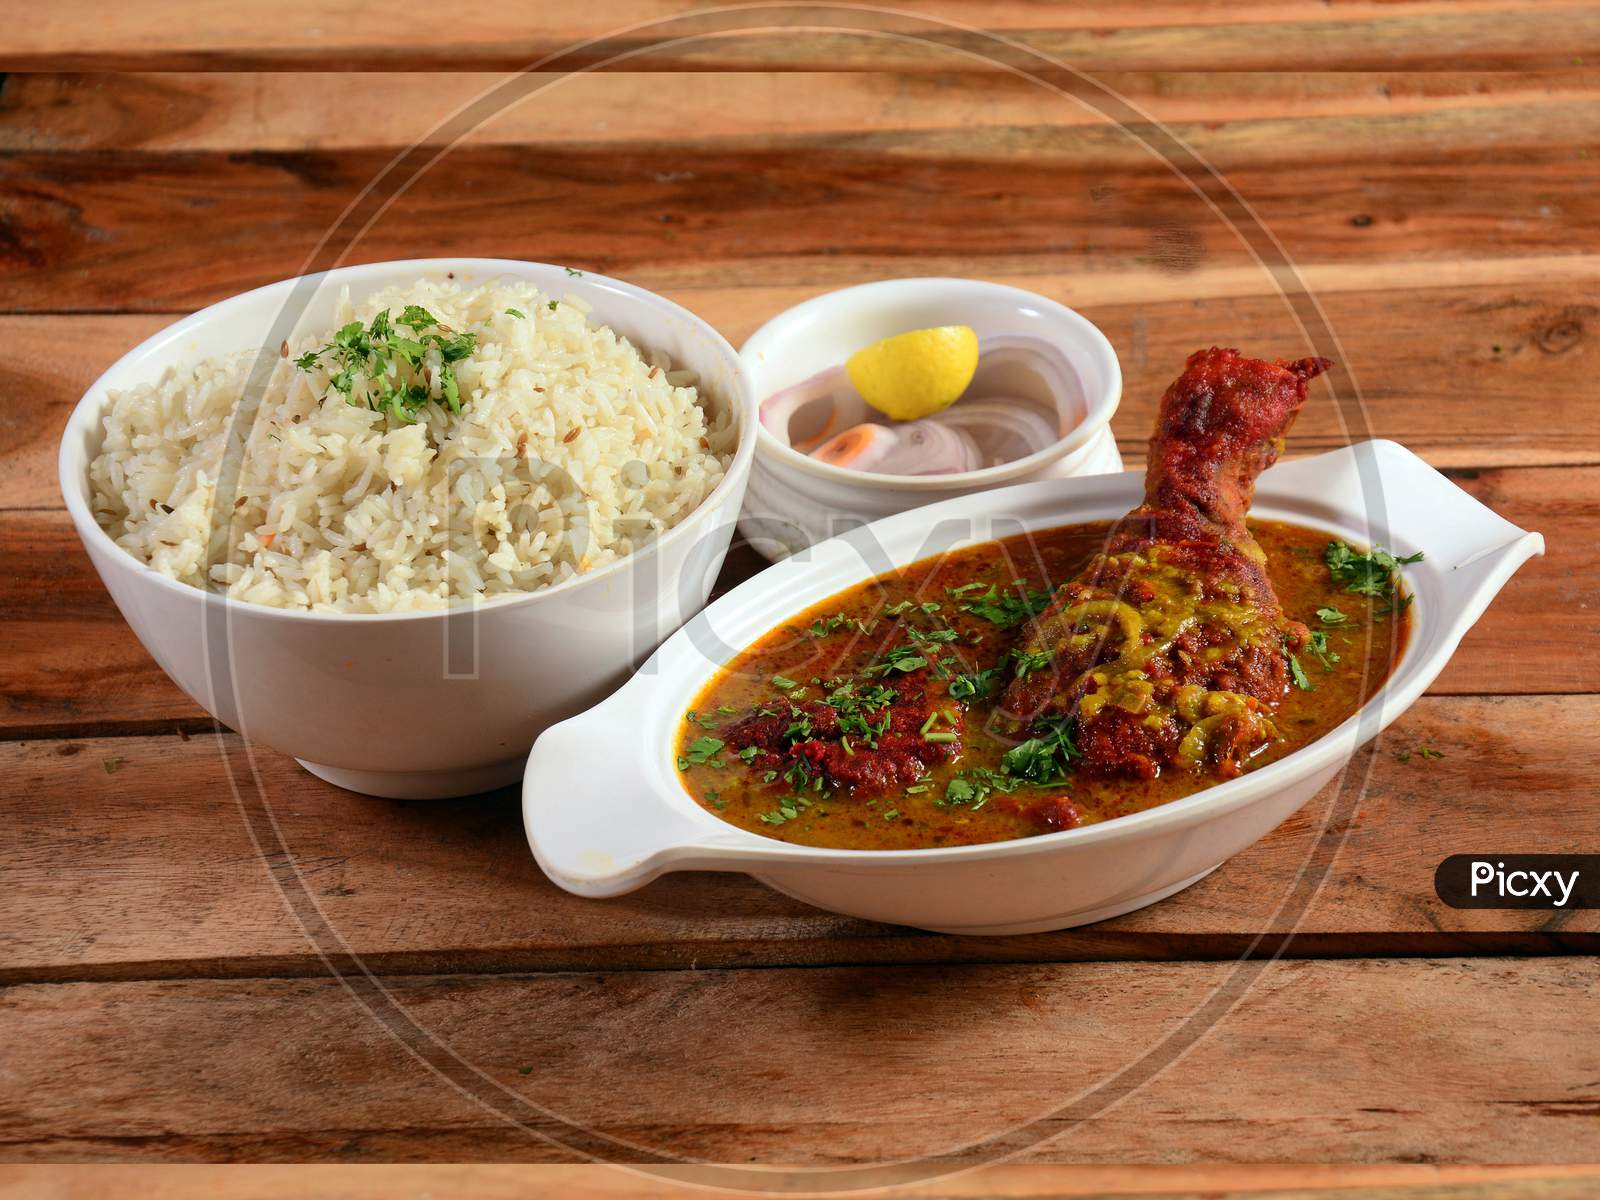 Traditional Indian Cuisine, Chicken Curry And Boiled Rice On White Ceramic Bowl On The Rustic Wooden Background, With Lemon And Onion